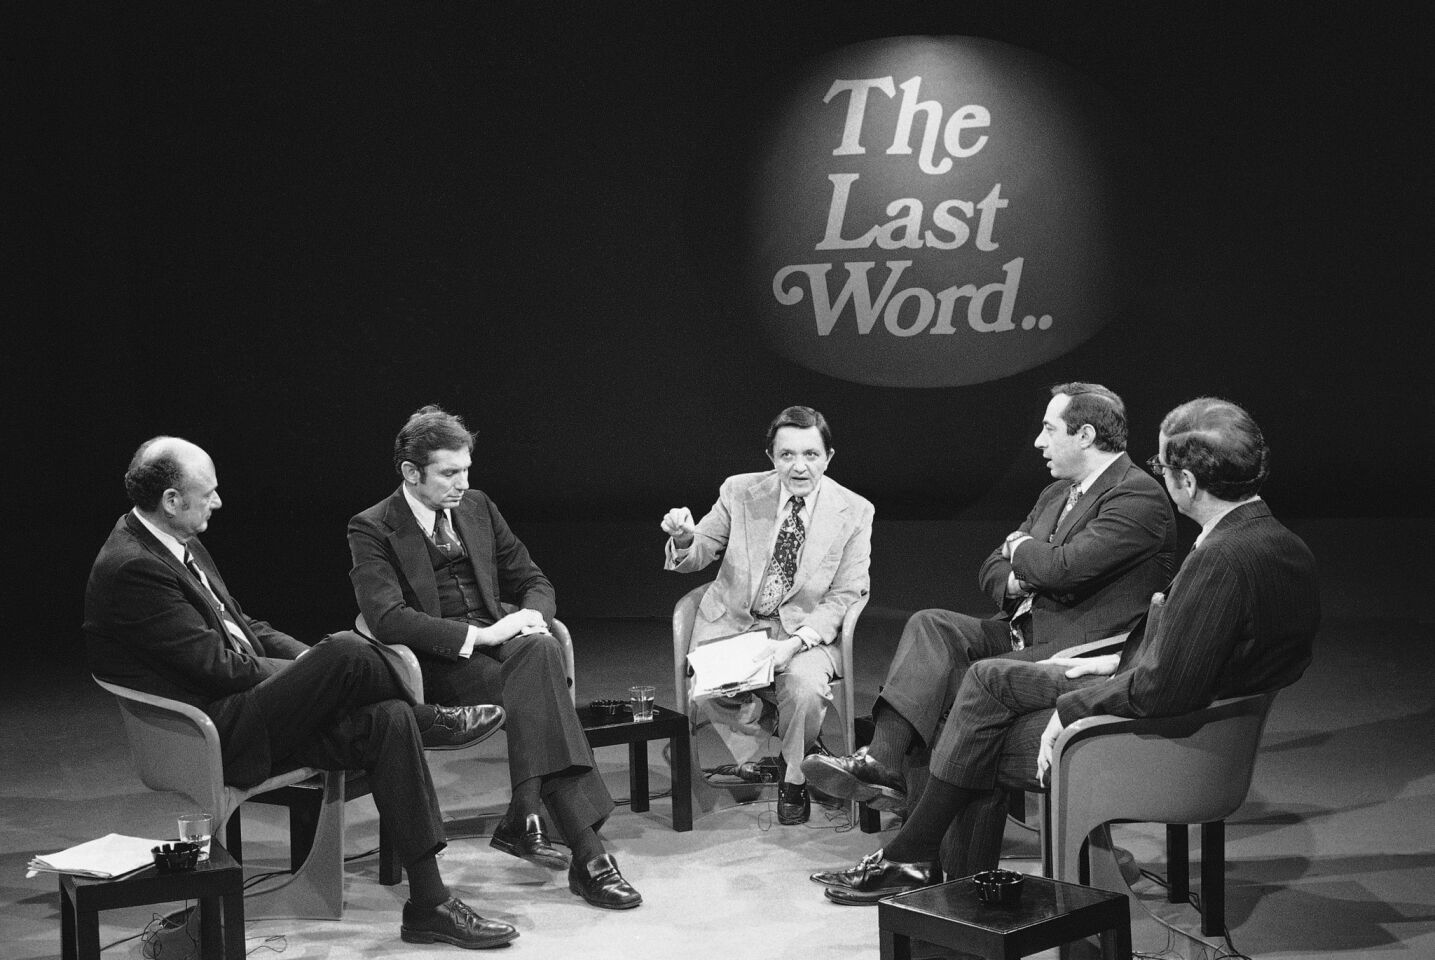 Pressman, center, was an Emmy-winning journalist who worked at WNBC for more than 50 years after stints at New Jersey's Newark Evening News and the New York World Telegram and Sun. He covered the 1956 sinking of the Italian ocean liner Andrea Doria, riots at the 1968 Democratic National Convention, the Woodstock festival in 1969 and the terror attacks on Sept. 11, 2001. He was 93. Full obituary